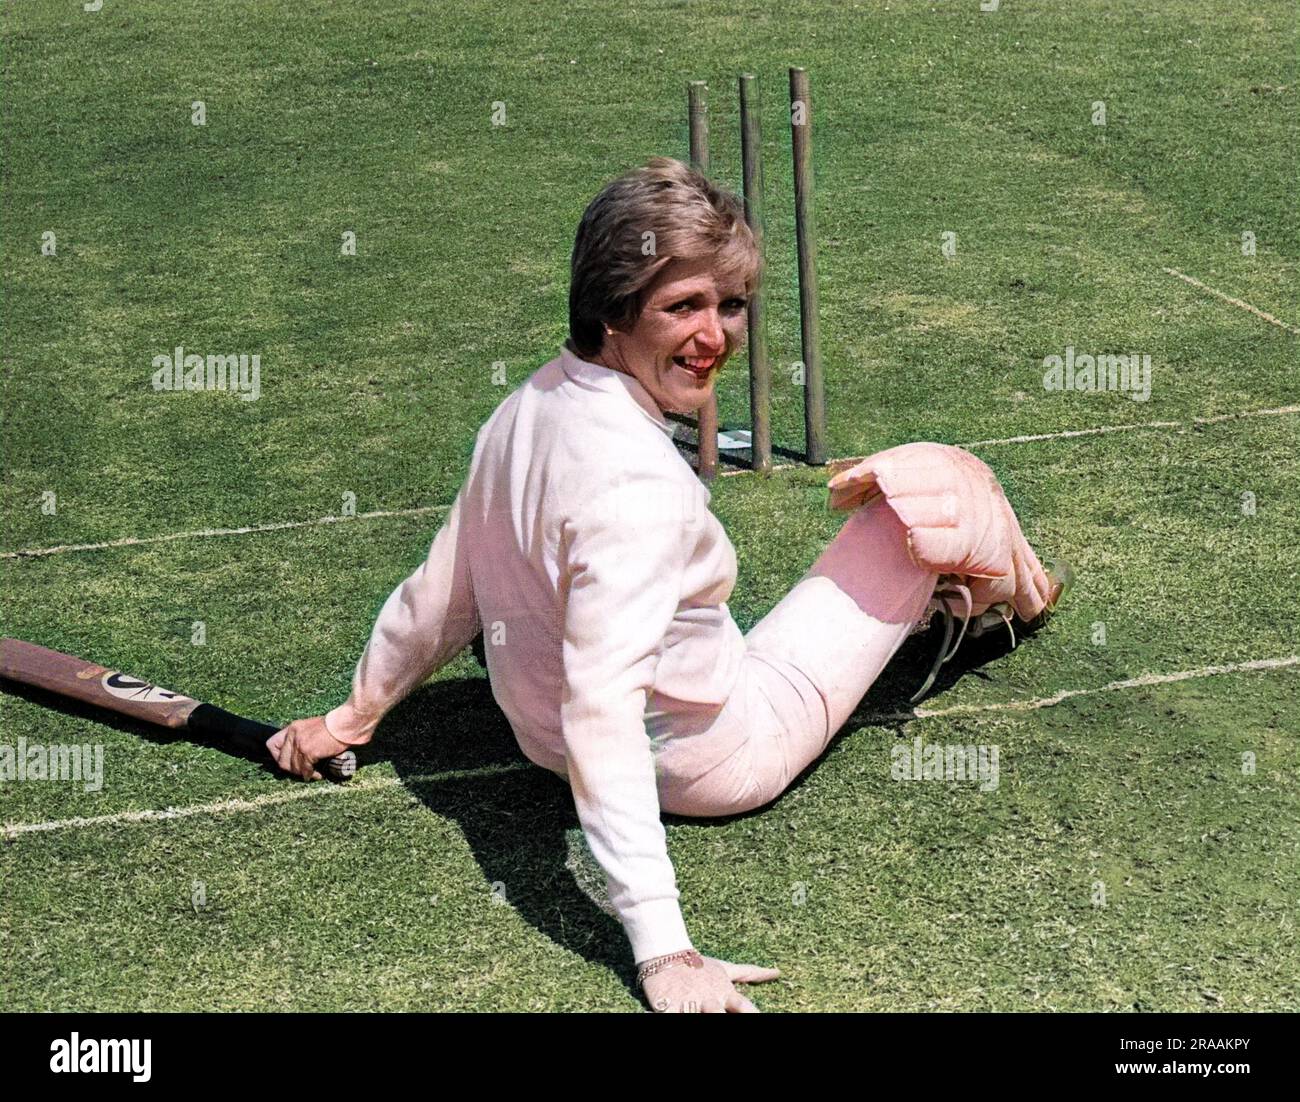 Judi Spiers (b. 1953), radio and TV presenter, seen here taking part in a cricket match.     Date: circa 1980s Stock Photo